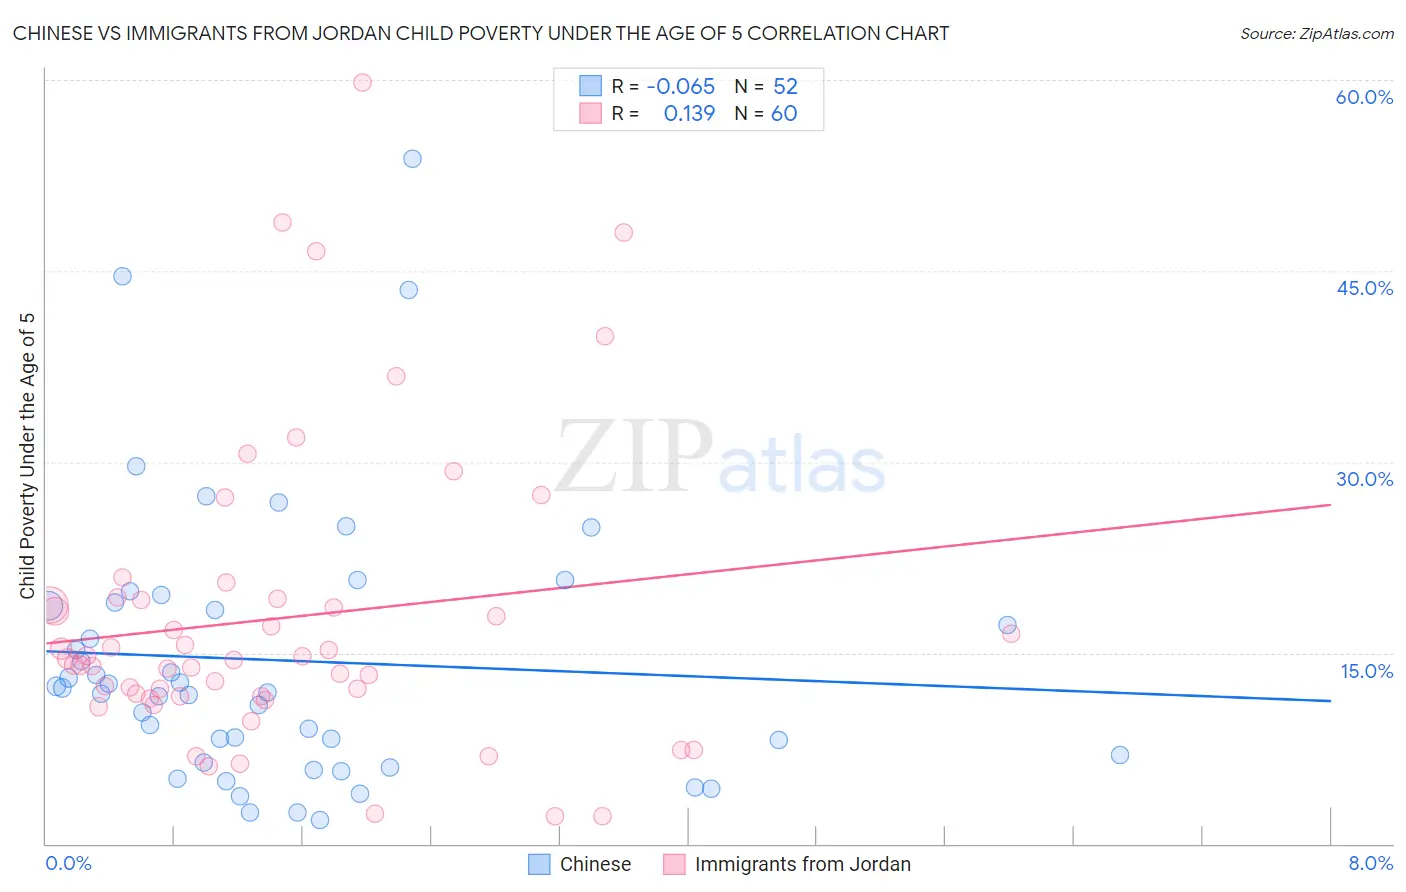 Chinese vs Immigrants from Jordan Child Poverty Under the Age of 5